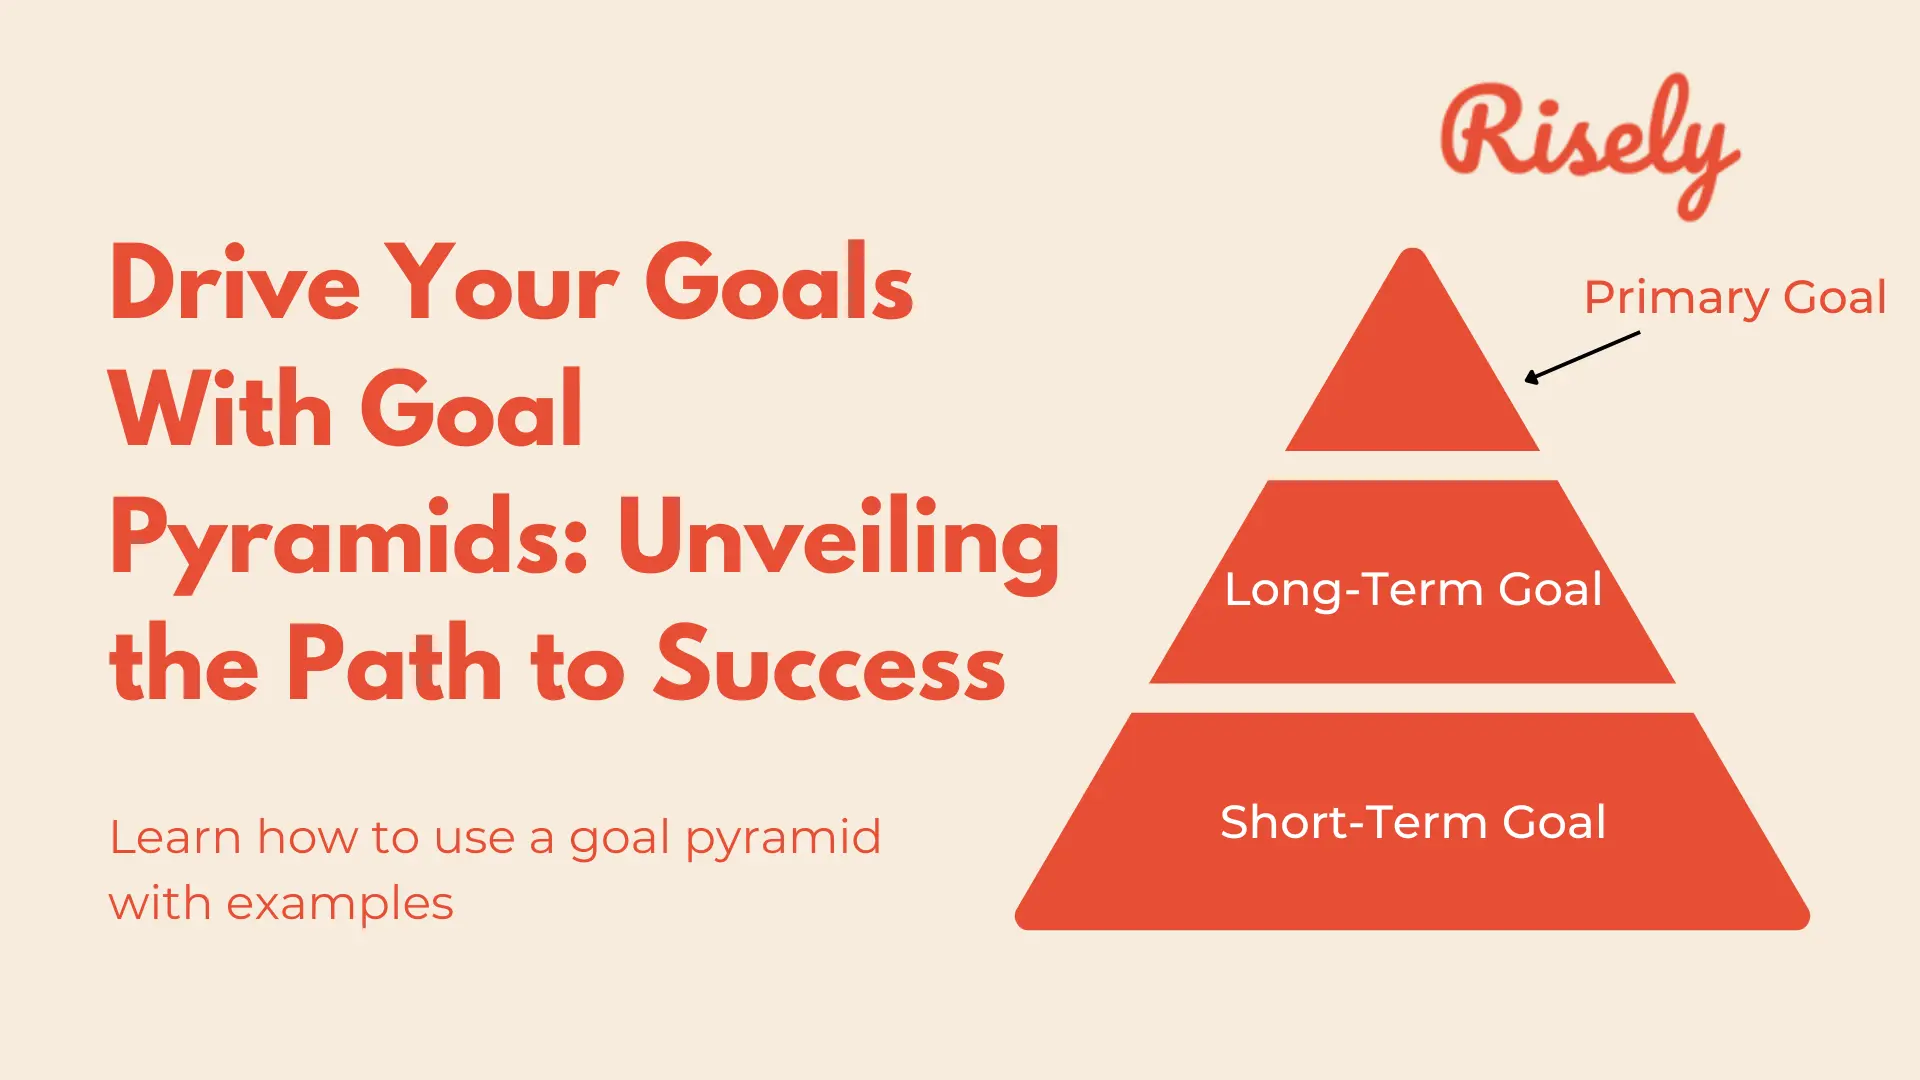 Drive Your Goals With Goal Pyramids: Unveiling the Path to Success